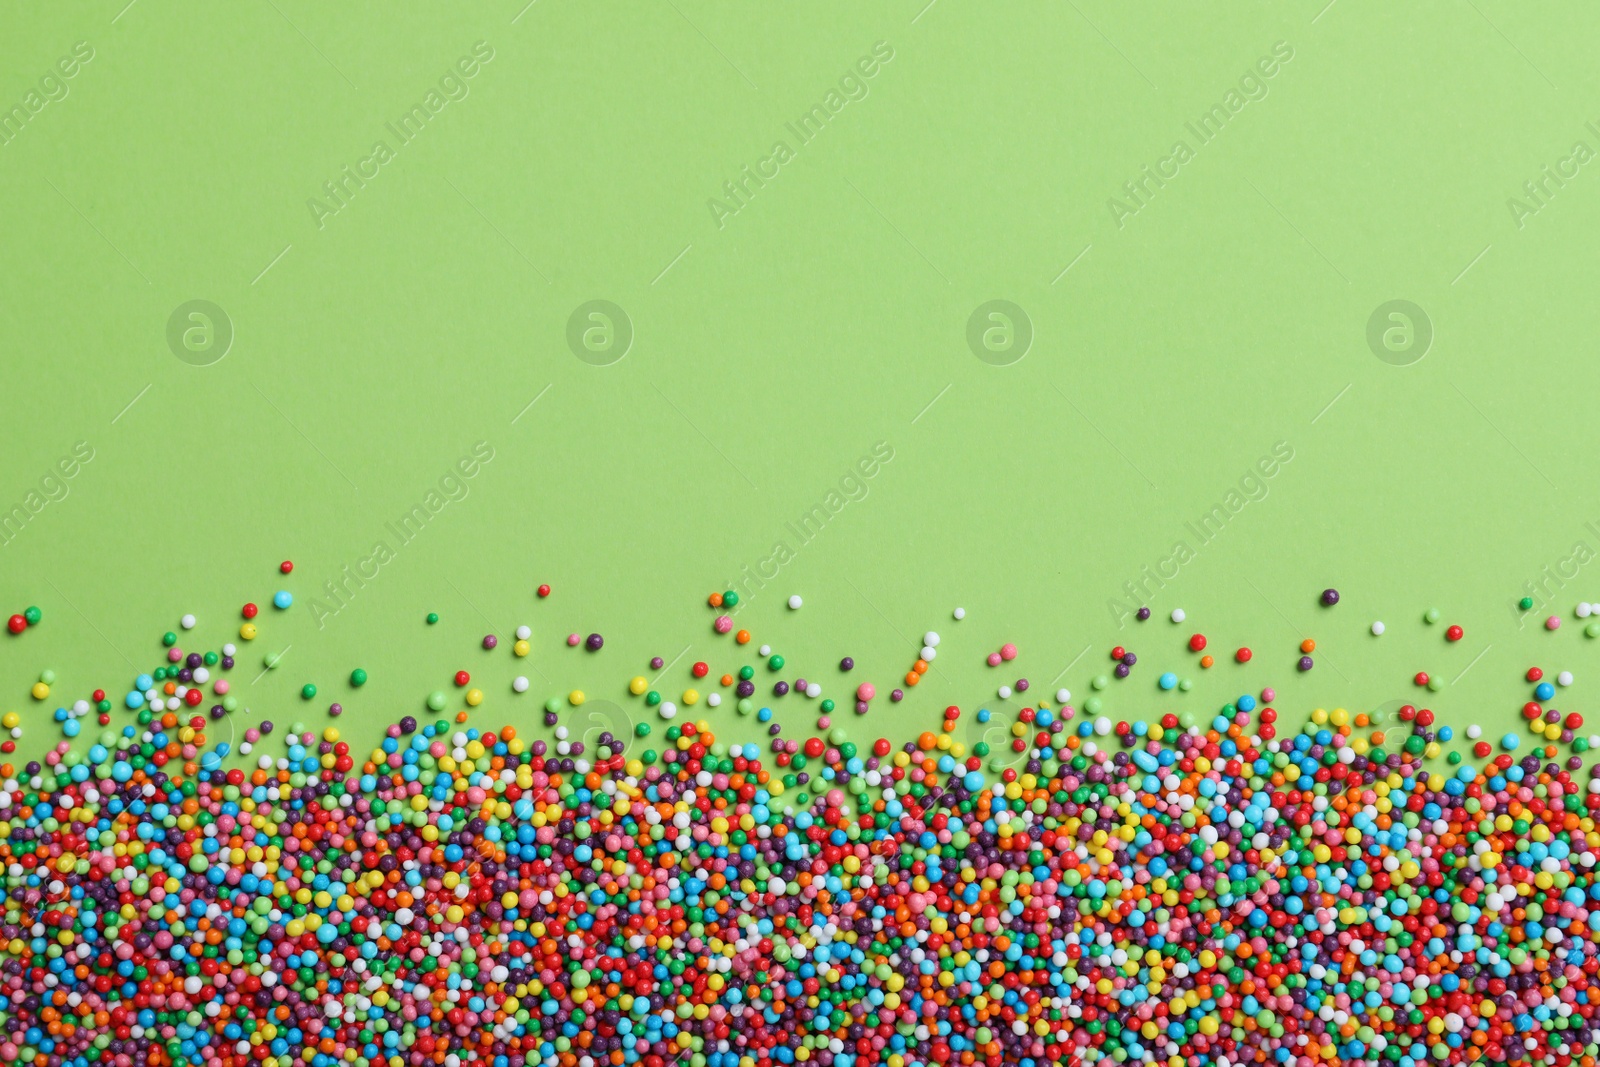 Photo of Colorful sprinkles on green background, flat lay with space for text. Confectionery decor